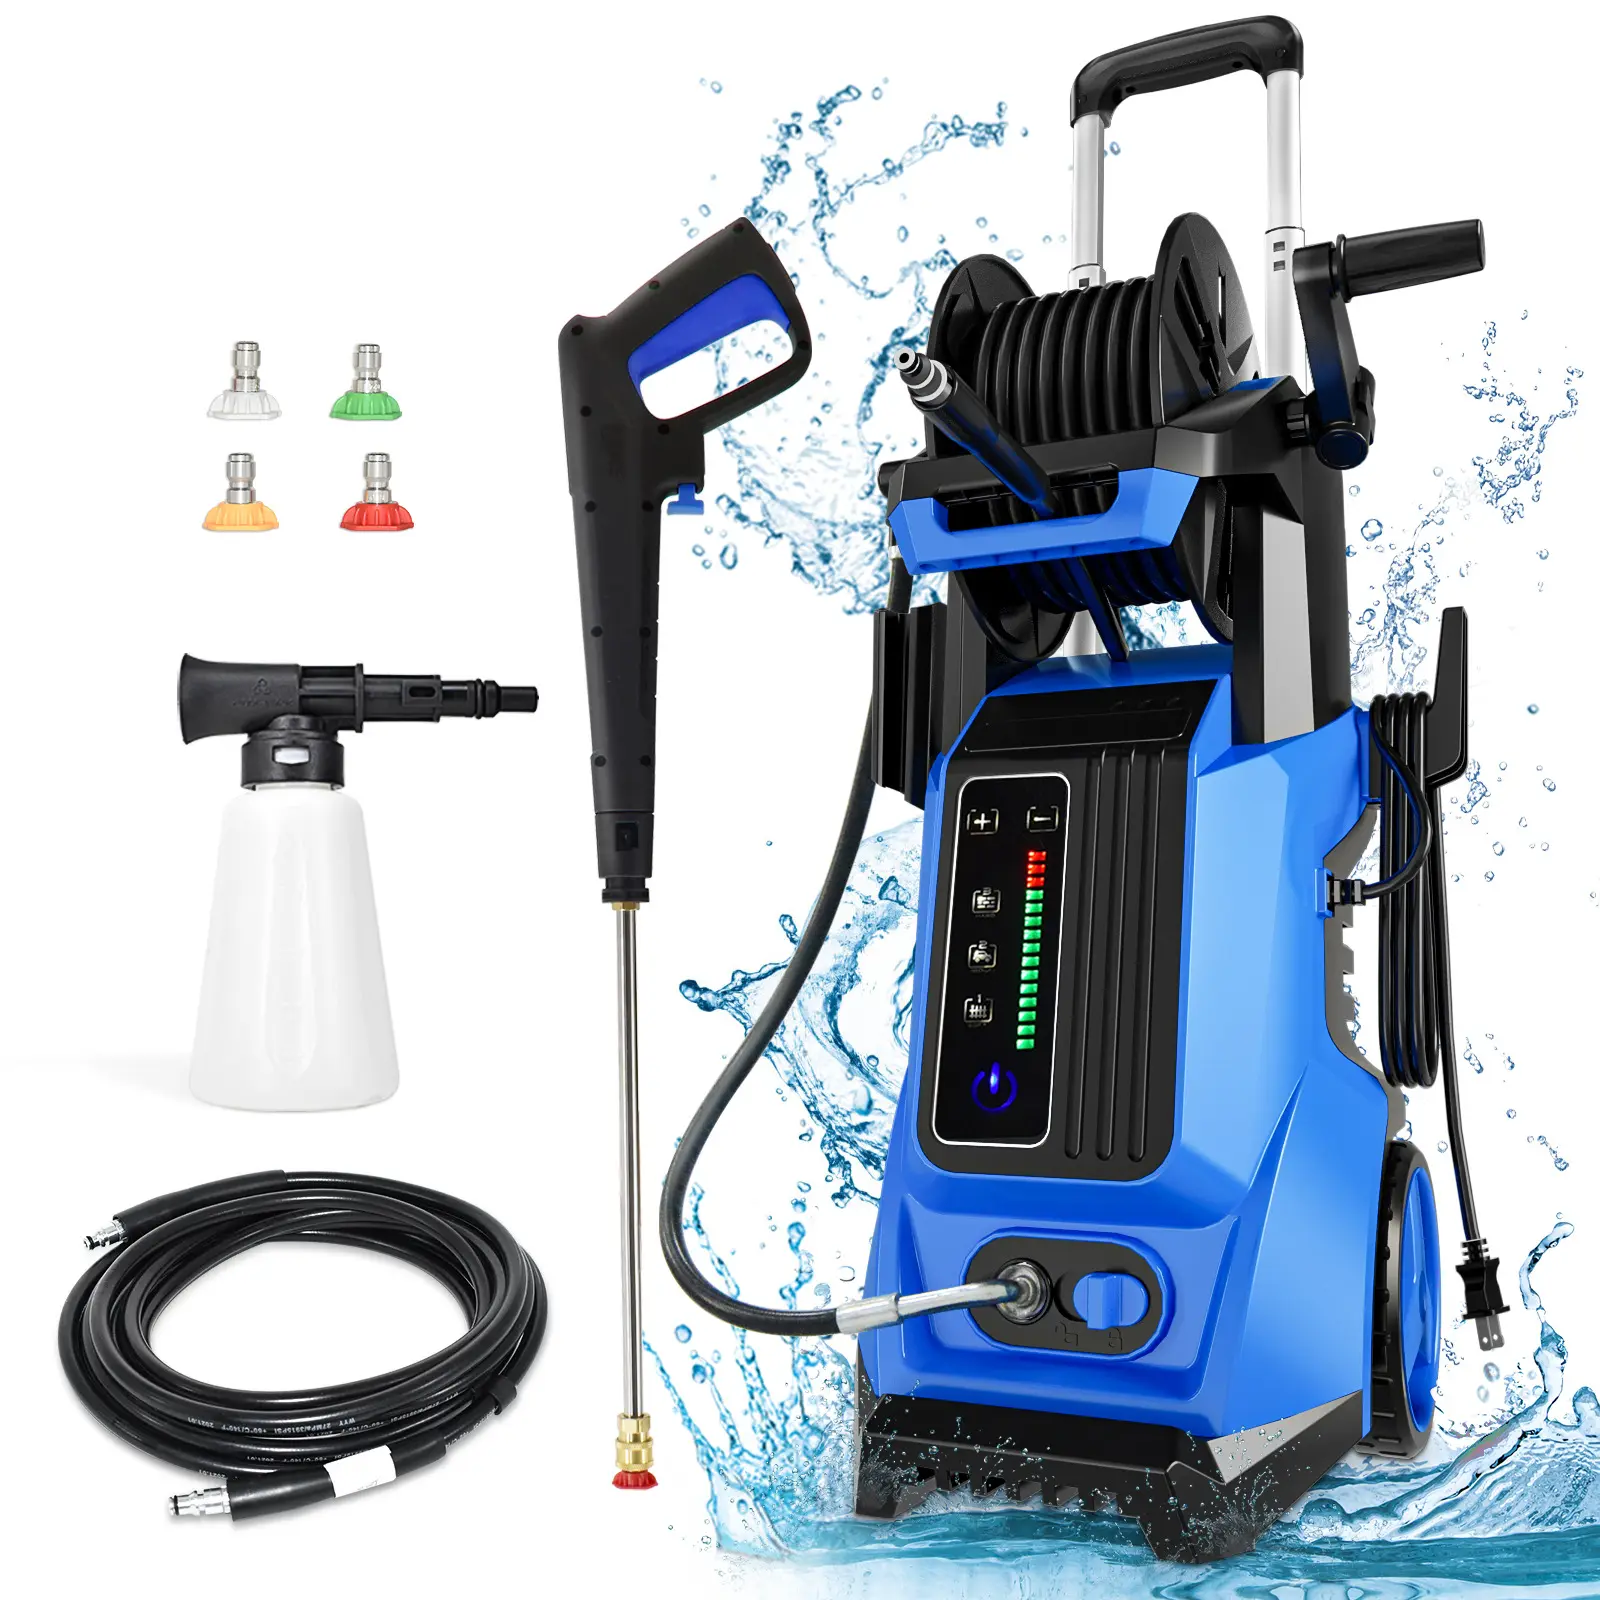 Best High Pressure Washer Cleaner Car Power Sprayer For Sale Water Jet Industrial Wash 2 In 1 Blaster Electric Cordless Portable